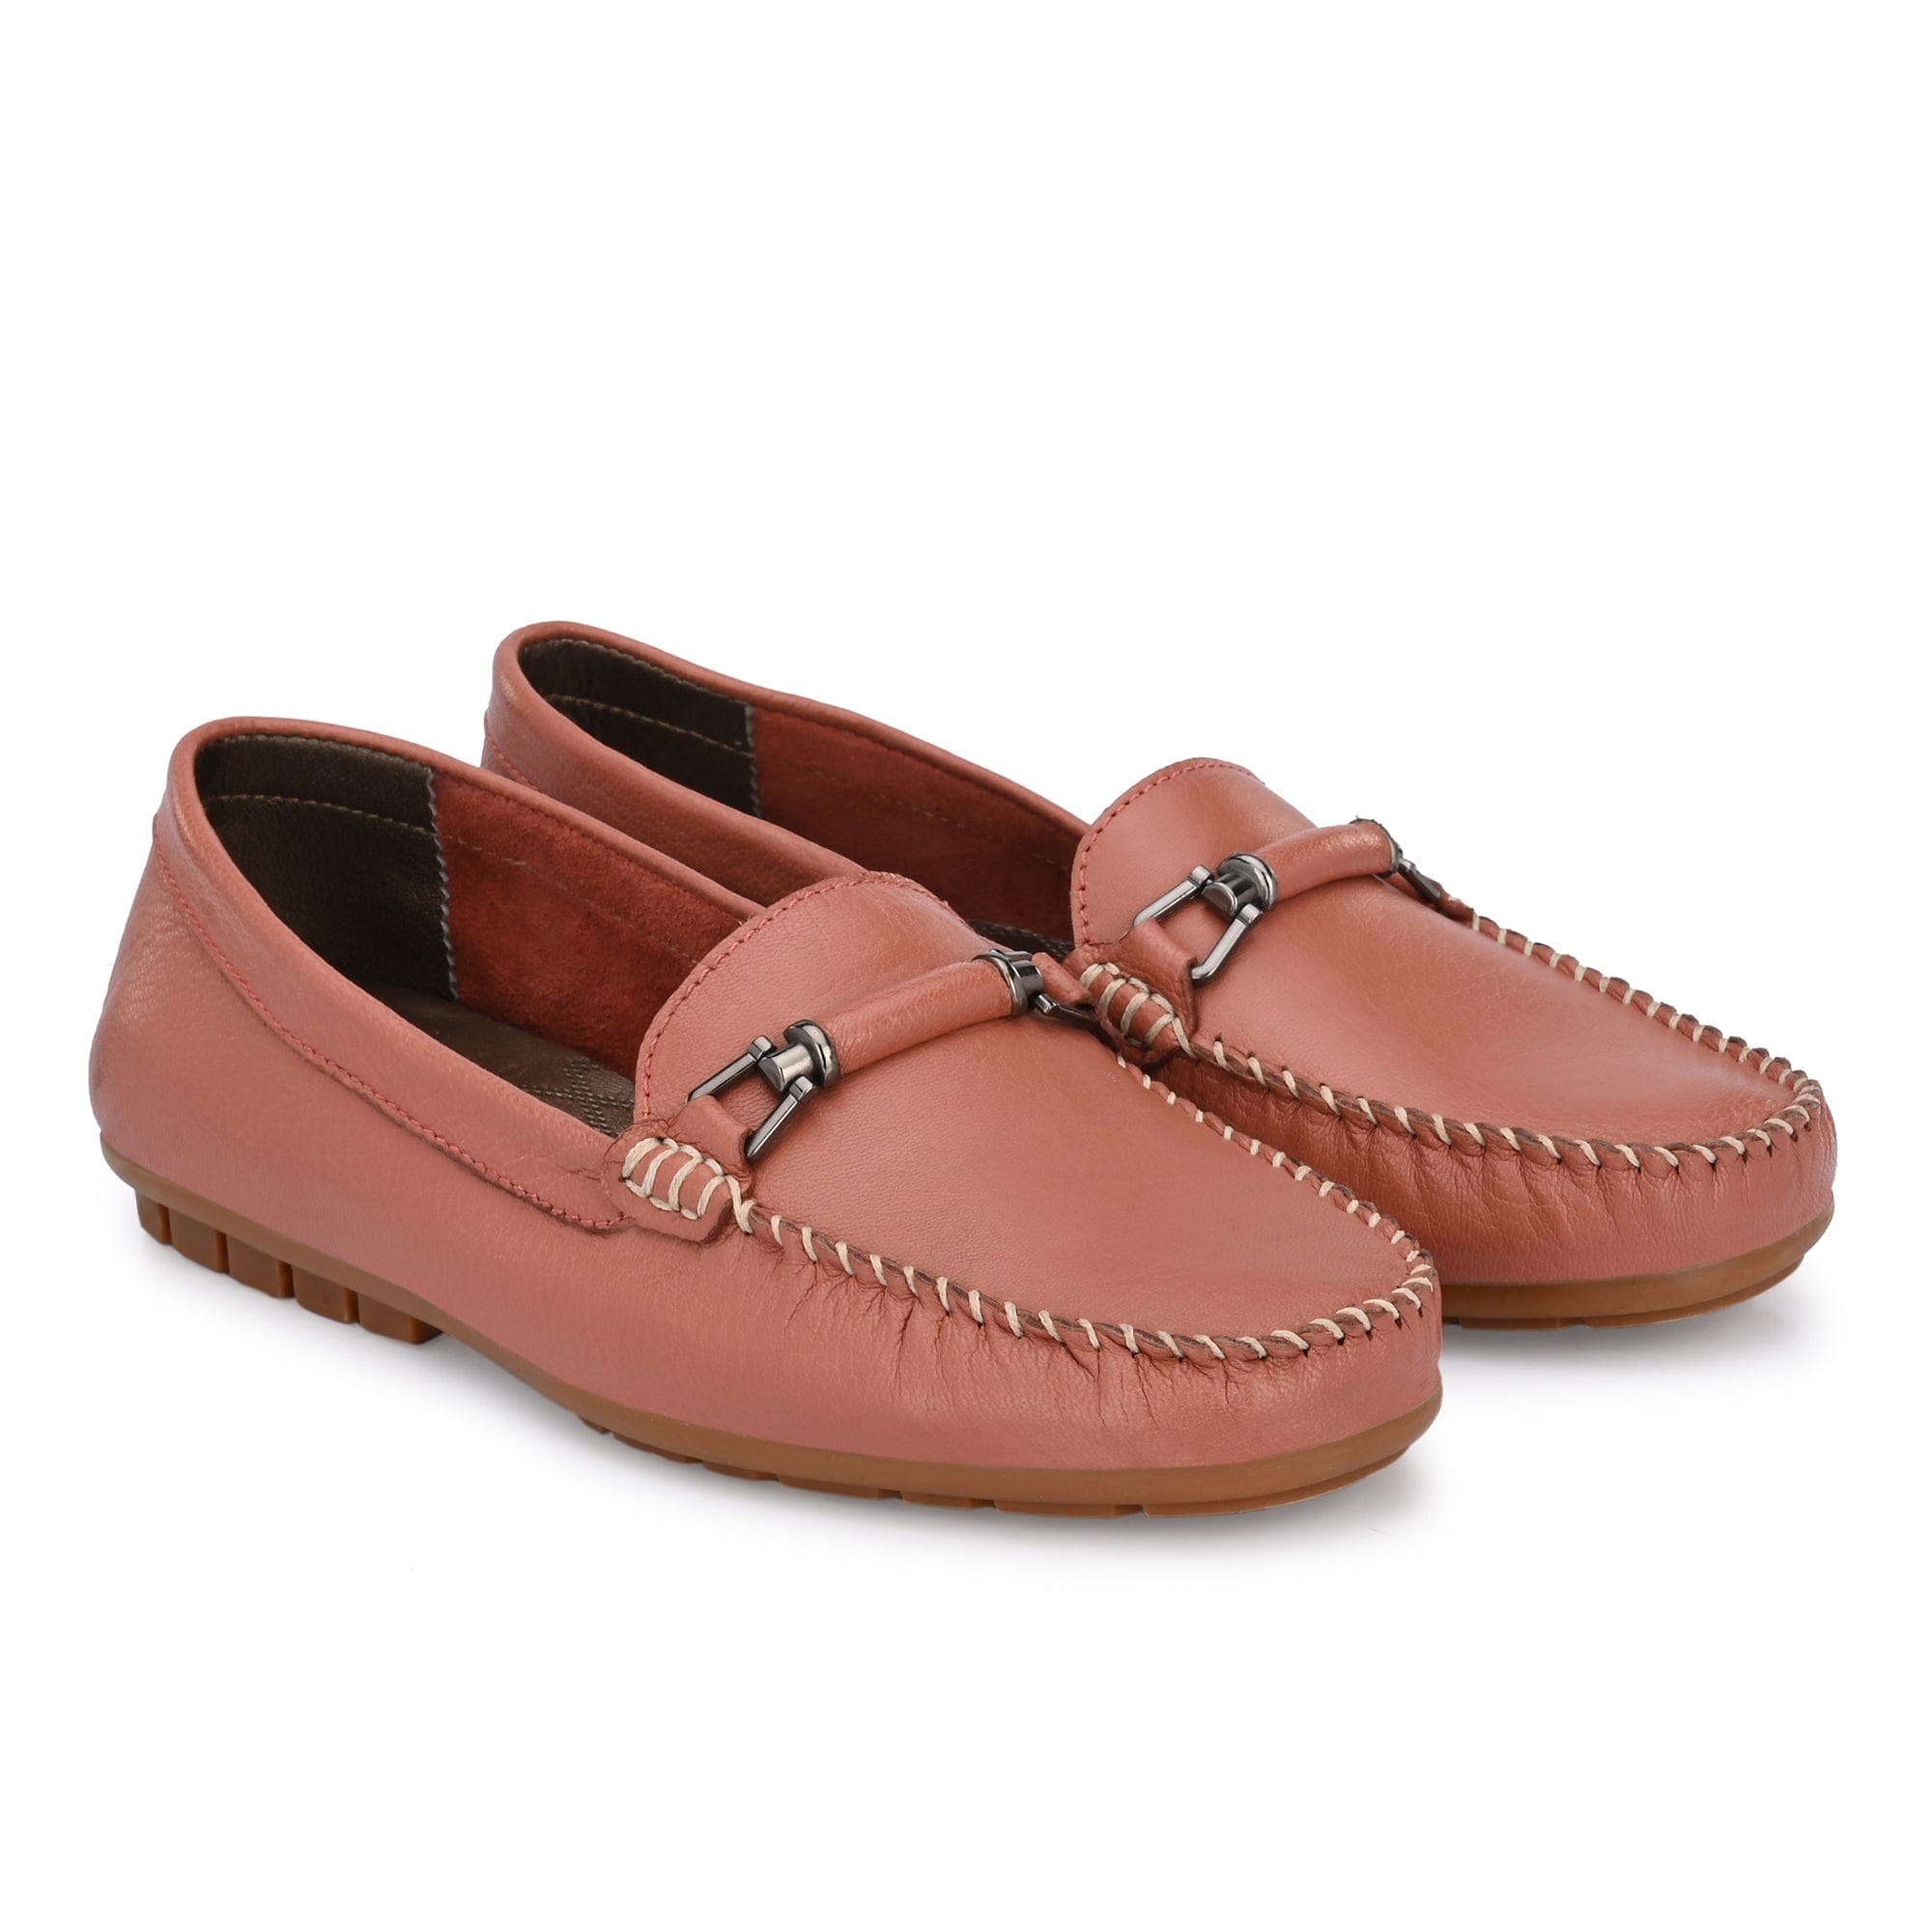 Matching buckled Casual Loafers For Women by Lady Boss egoss-shoes